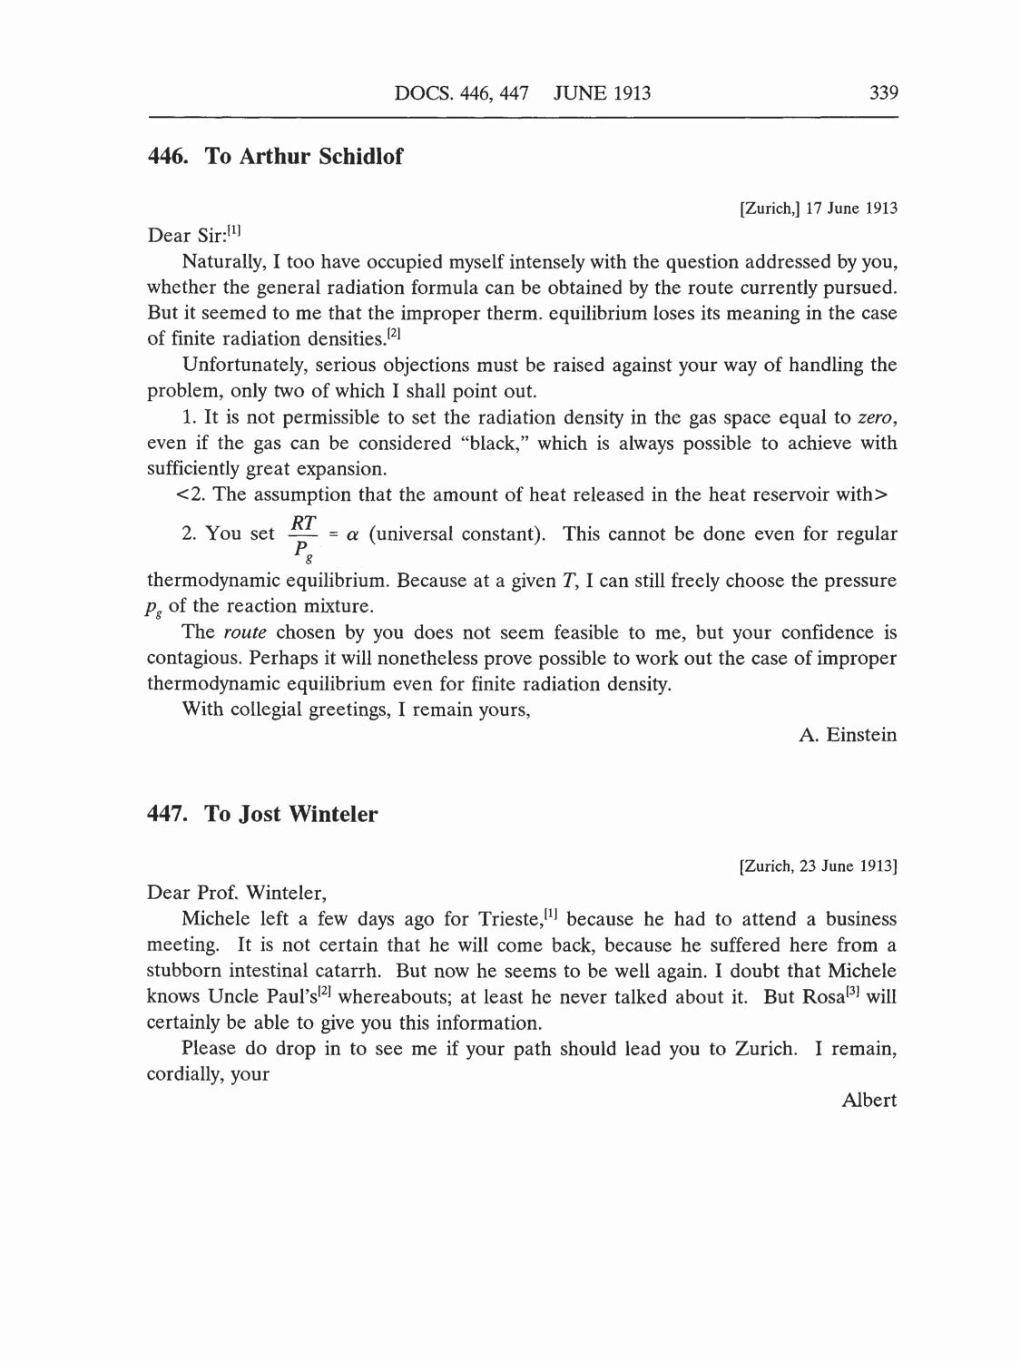 Volume 5: The Swiss Years: Correspondence, 1902-1914 (English translation supplement) page 339